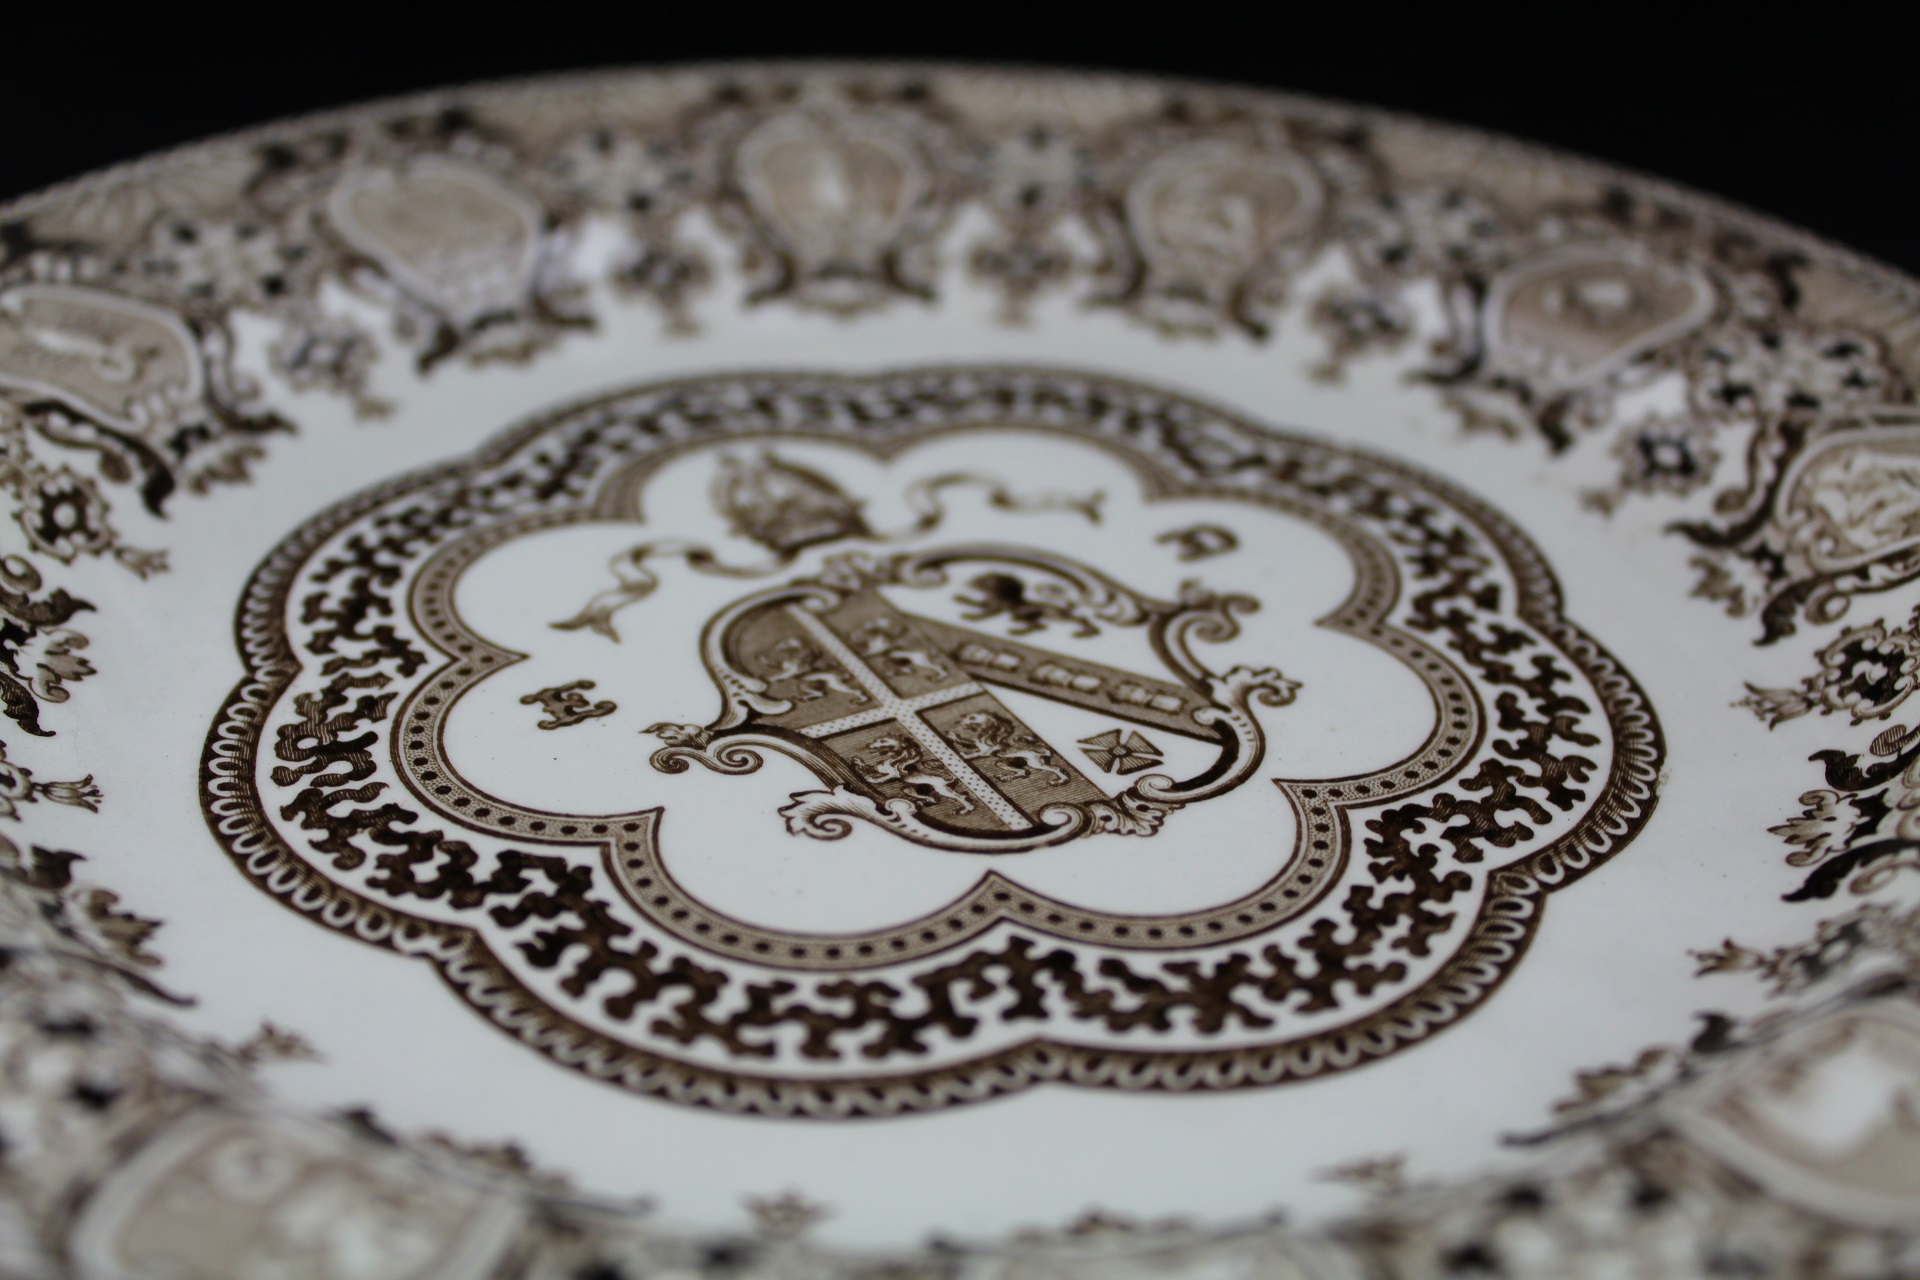 A coloured photograph showing the close-up detail on the plate, it includes the coat of arms for the Bishop of Durham at the centre. It is surrounded by scalloped floral detail and along the edge signs of the zodiac.